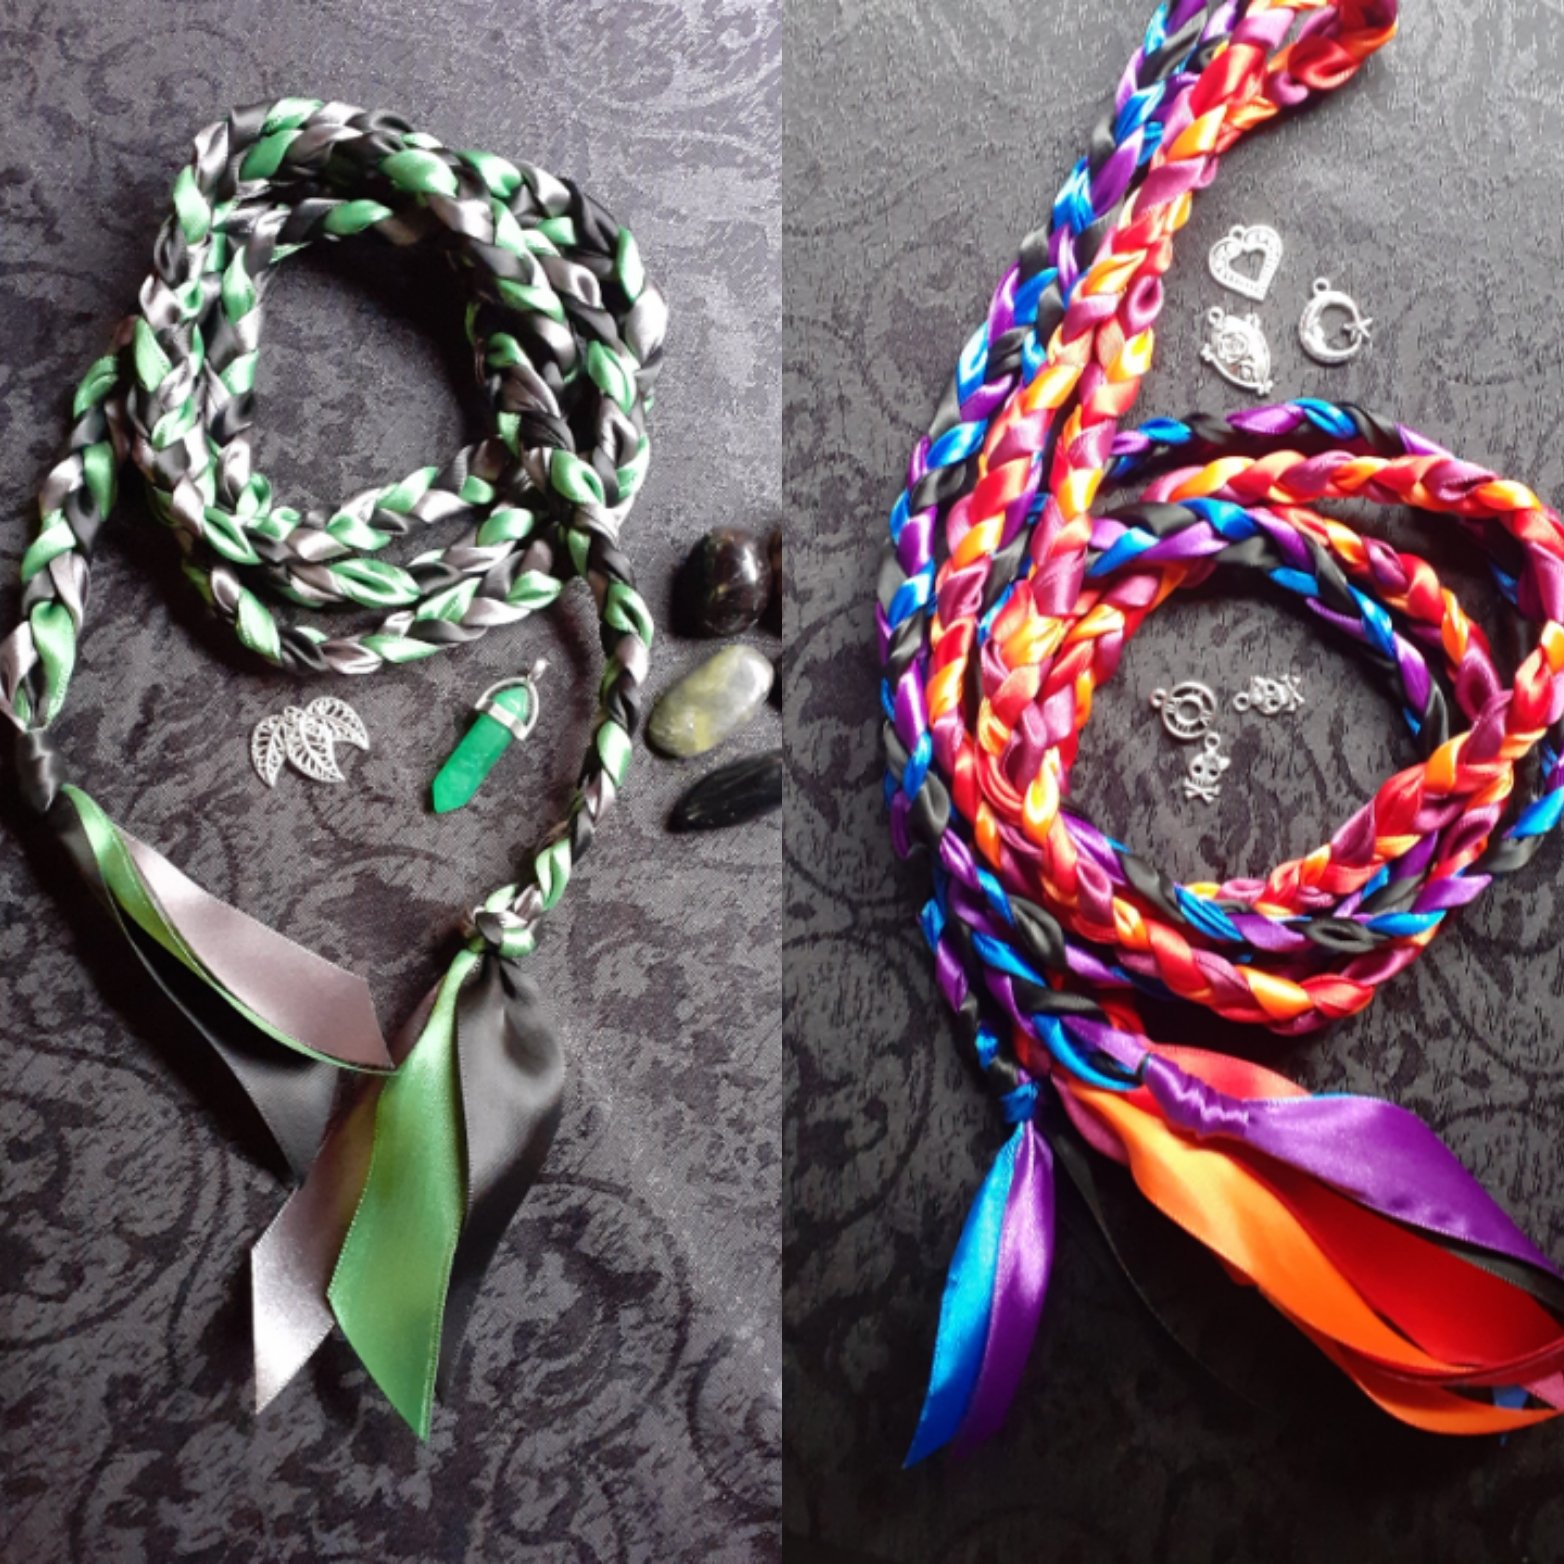 The Forest' Handfasting Cord